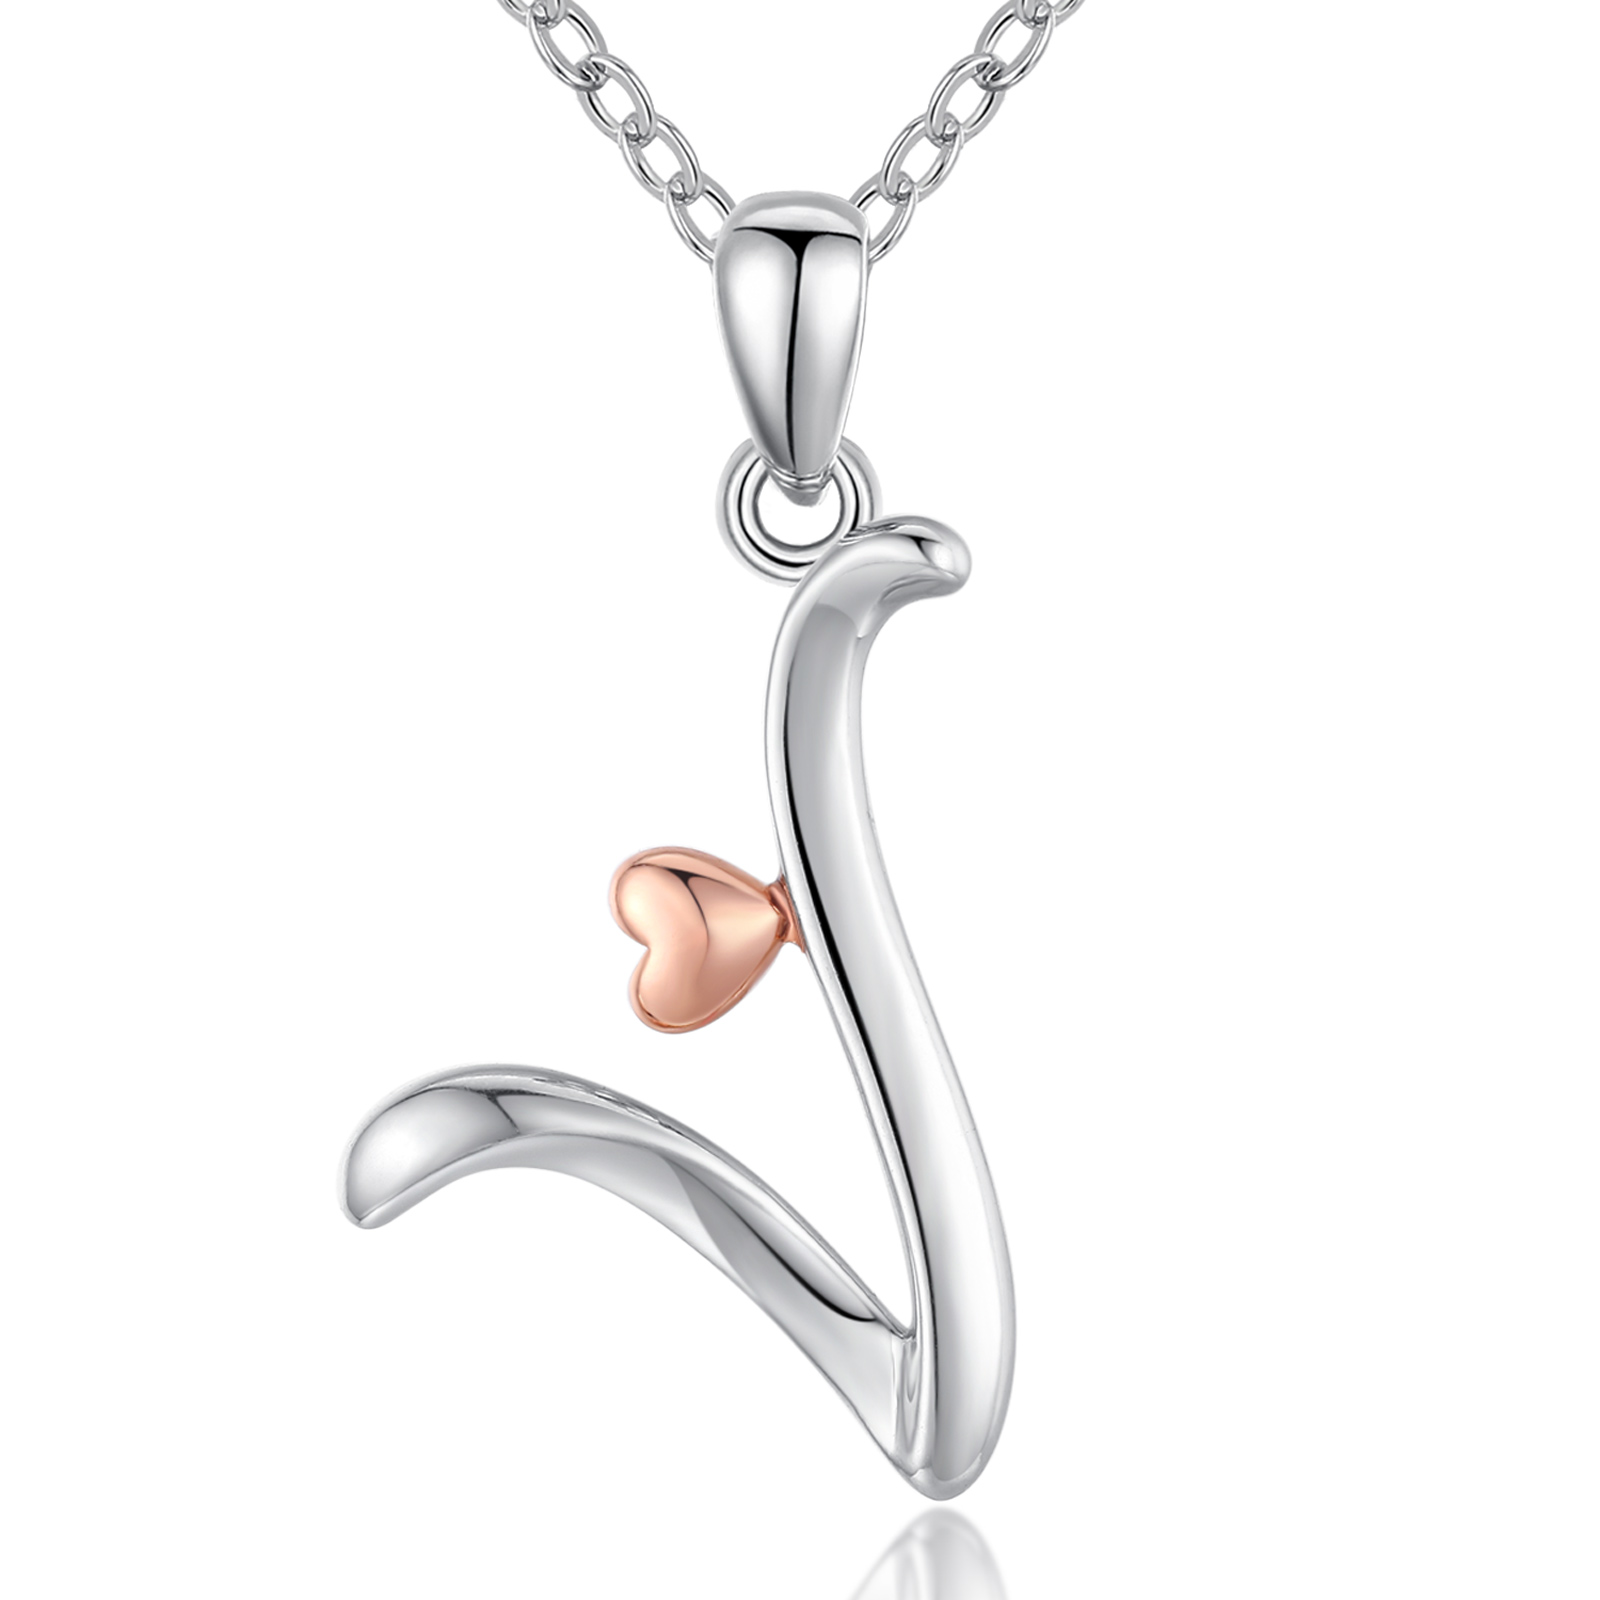 Merryshine Jewelry s925 sterling silver plated rhodium letter V initial pendant necklace for women and men